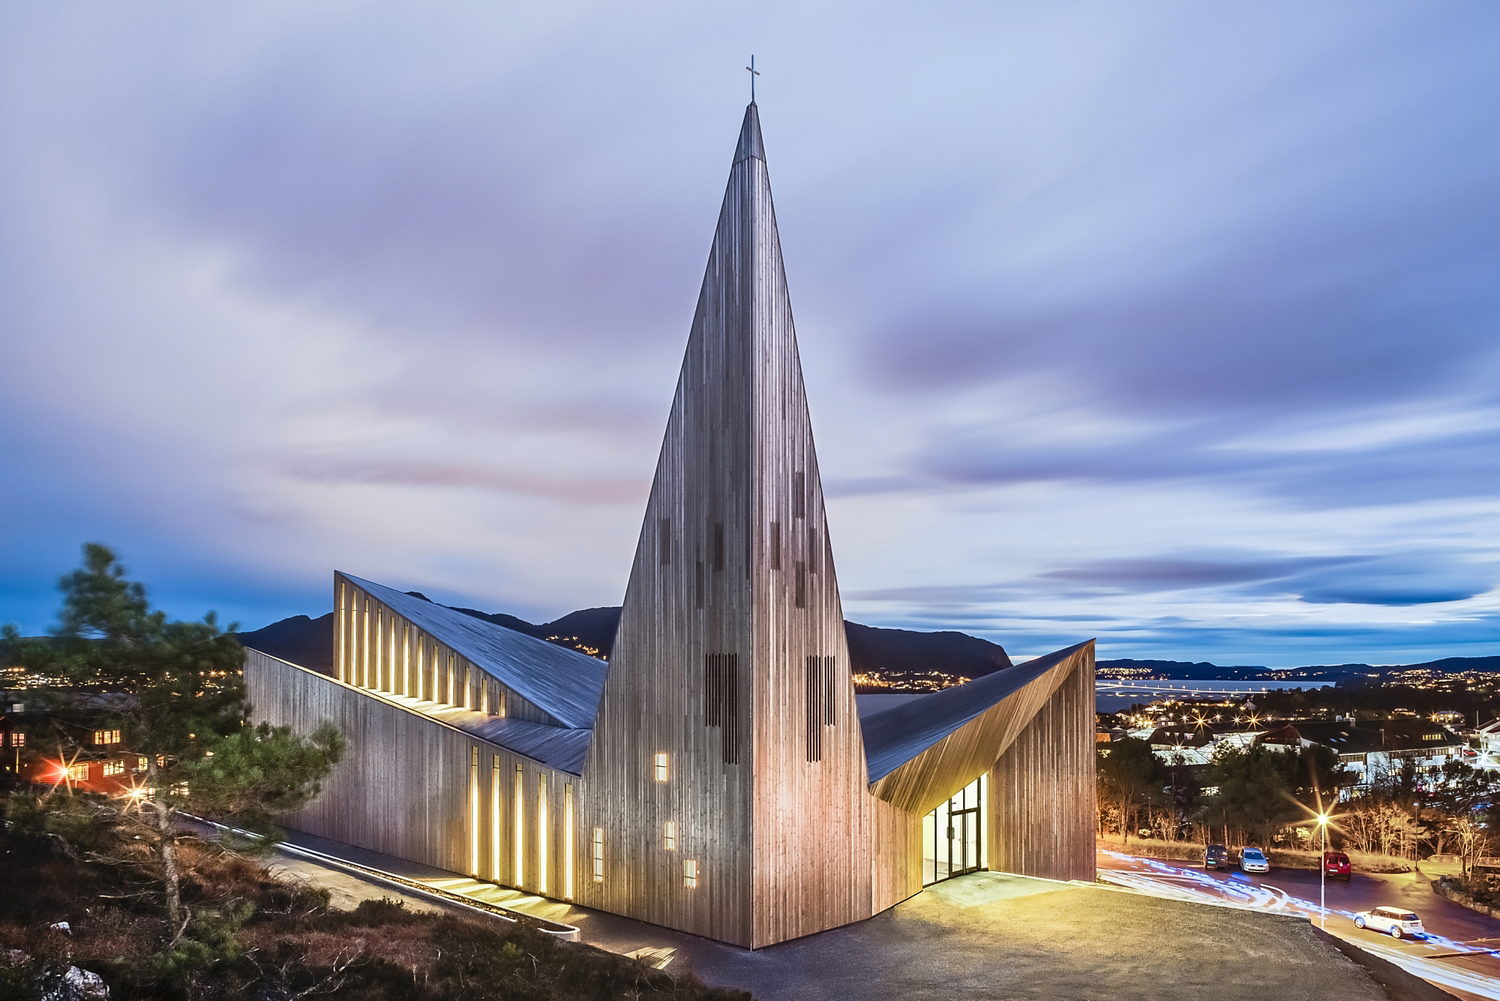  Church of Knarvik in Norway by  Reiulf Ramstad Arkitekter . Photography by  Hundven Clements Photography  